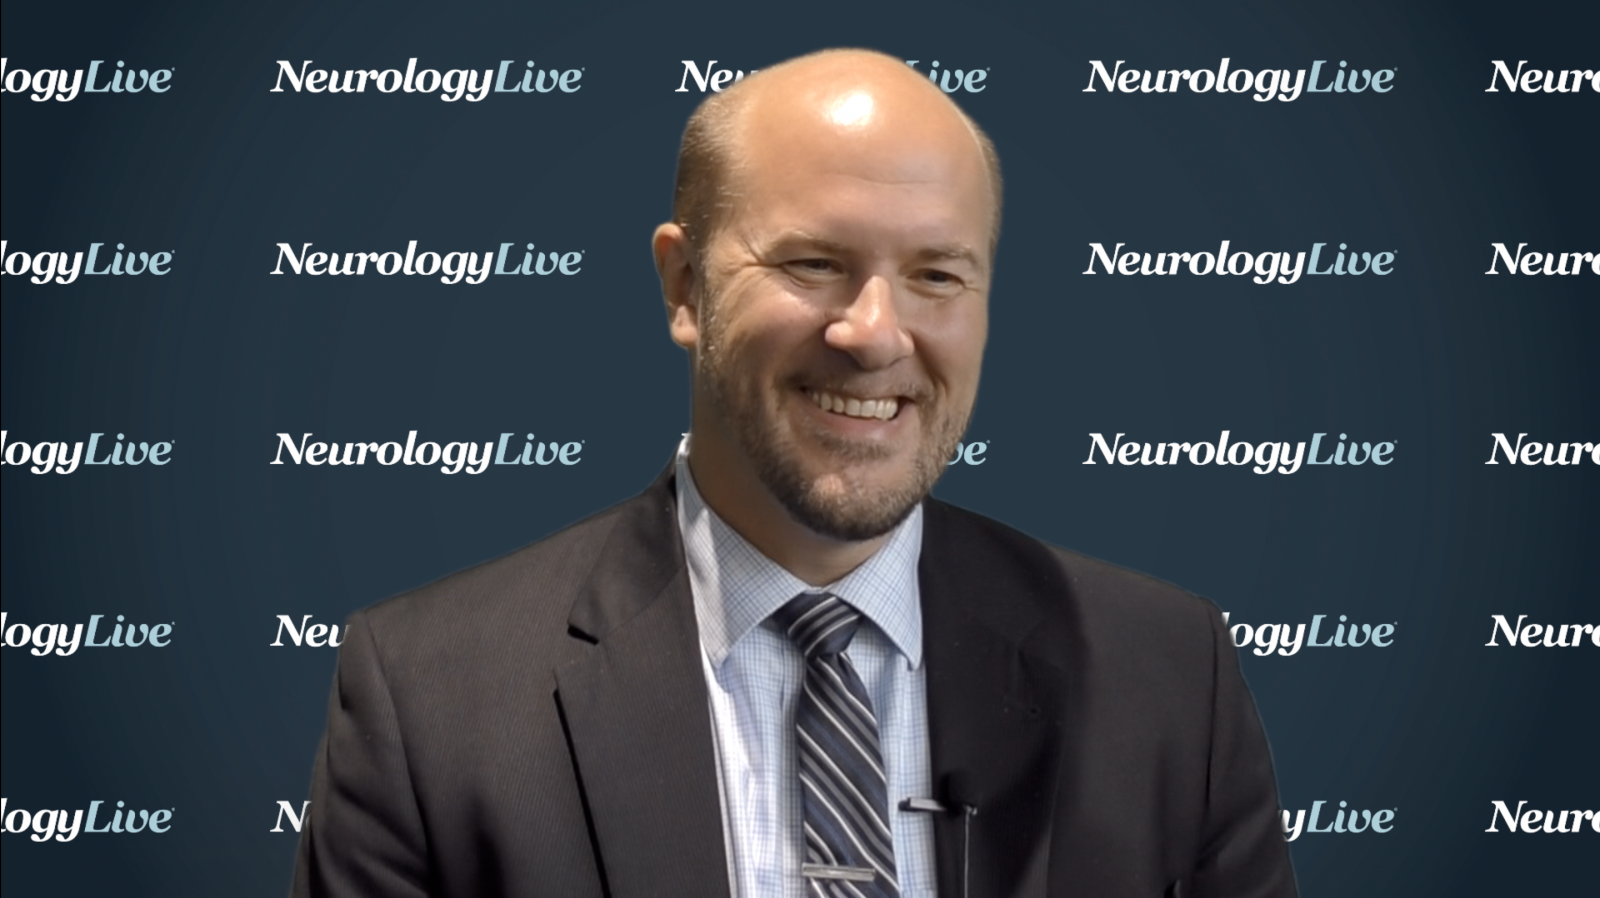 Benjamin Walter, MD: The State of Treatment for Parkinson Disease